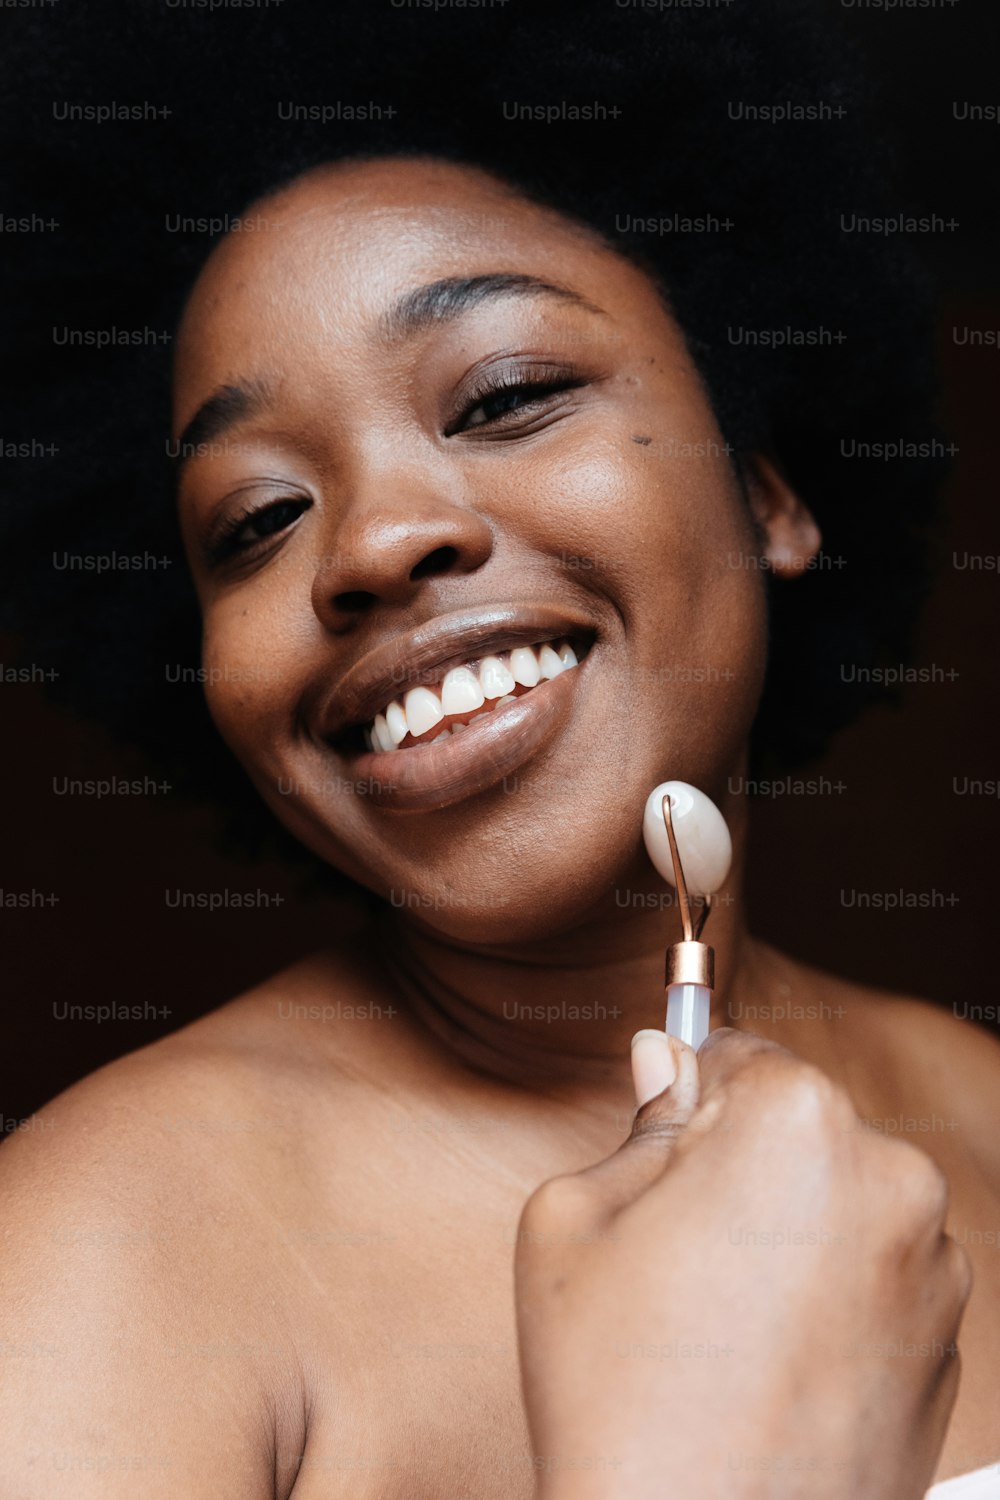 a woman is smiling while holding a toothbrush